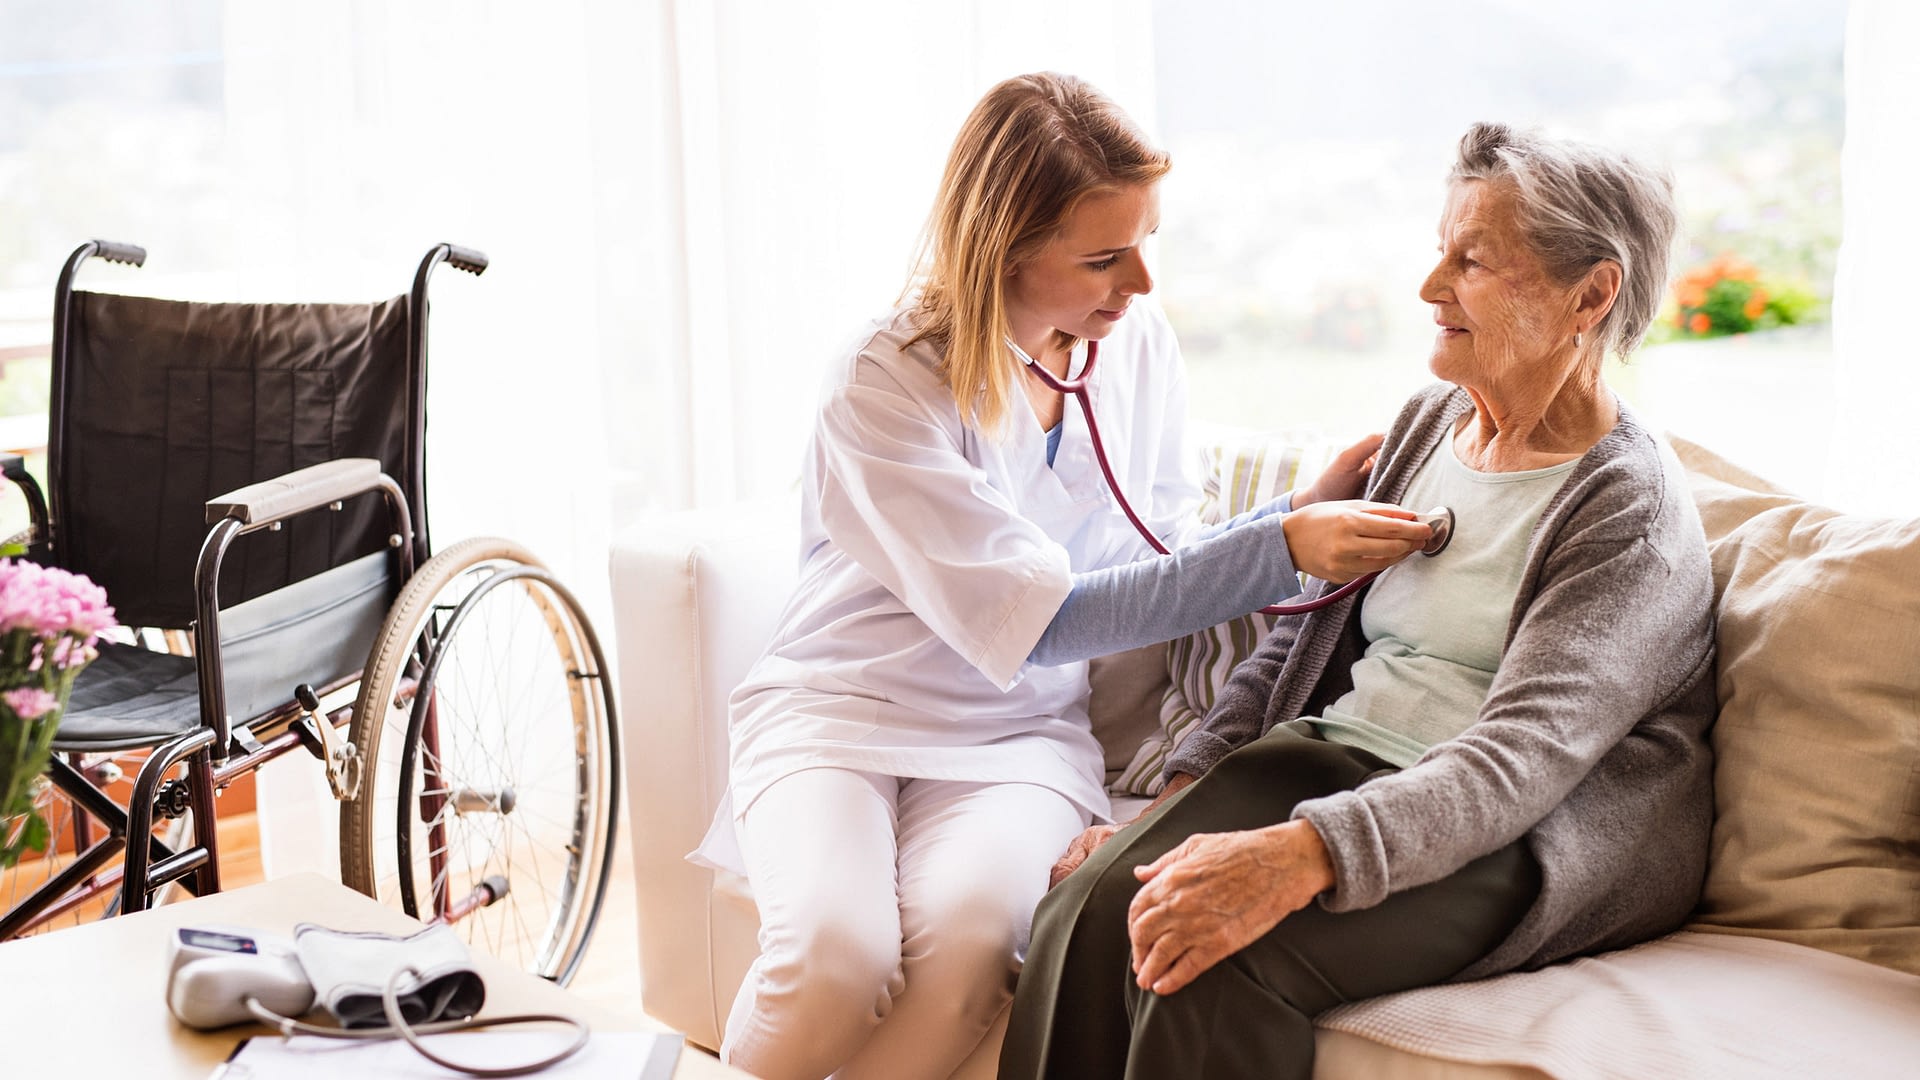 Health care worker examining senior patient during a home visit.